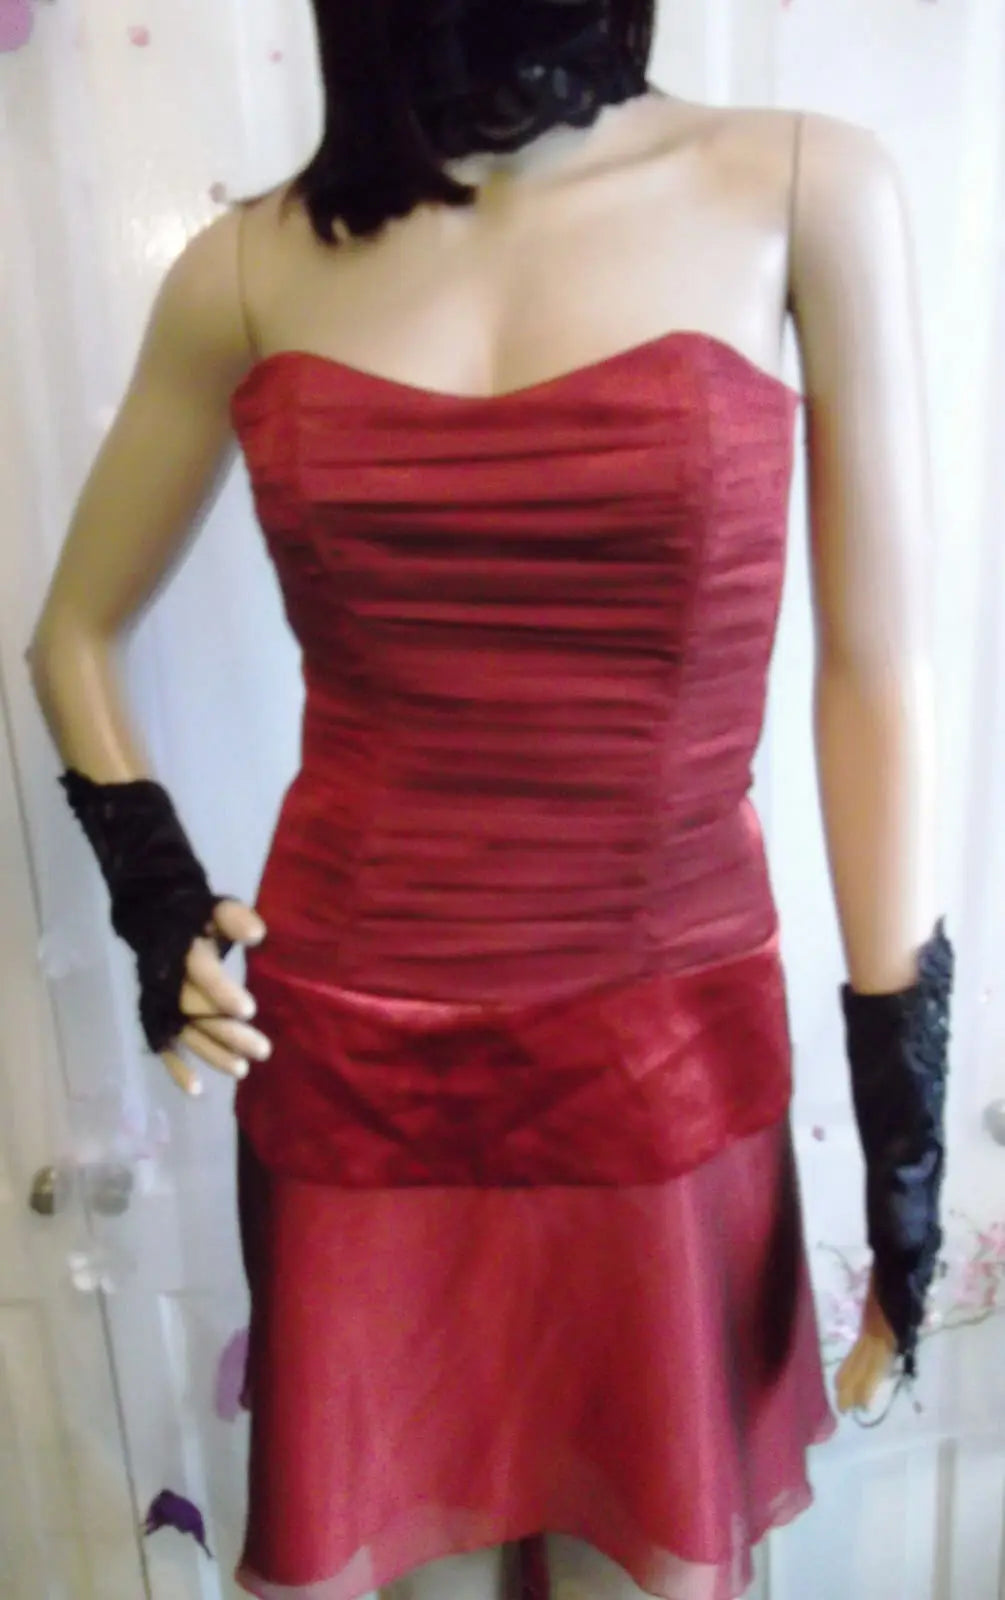 stunning Designer burlesque sexy lace up red corset bustle dress size 10 Charas